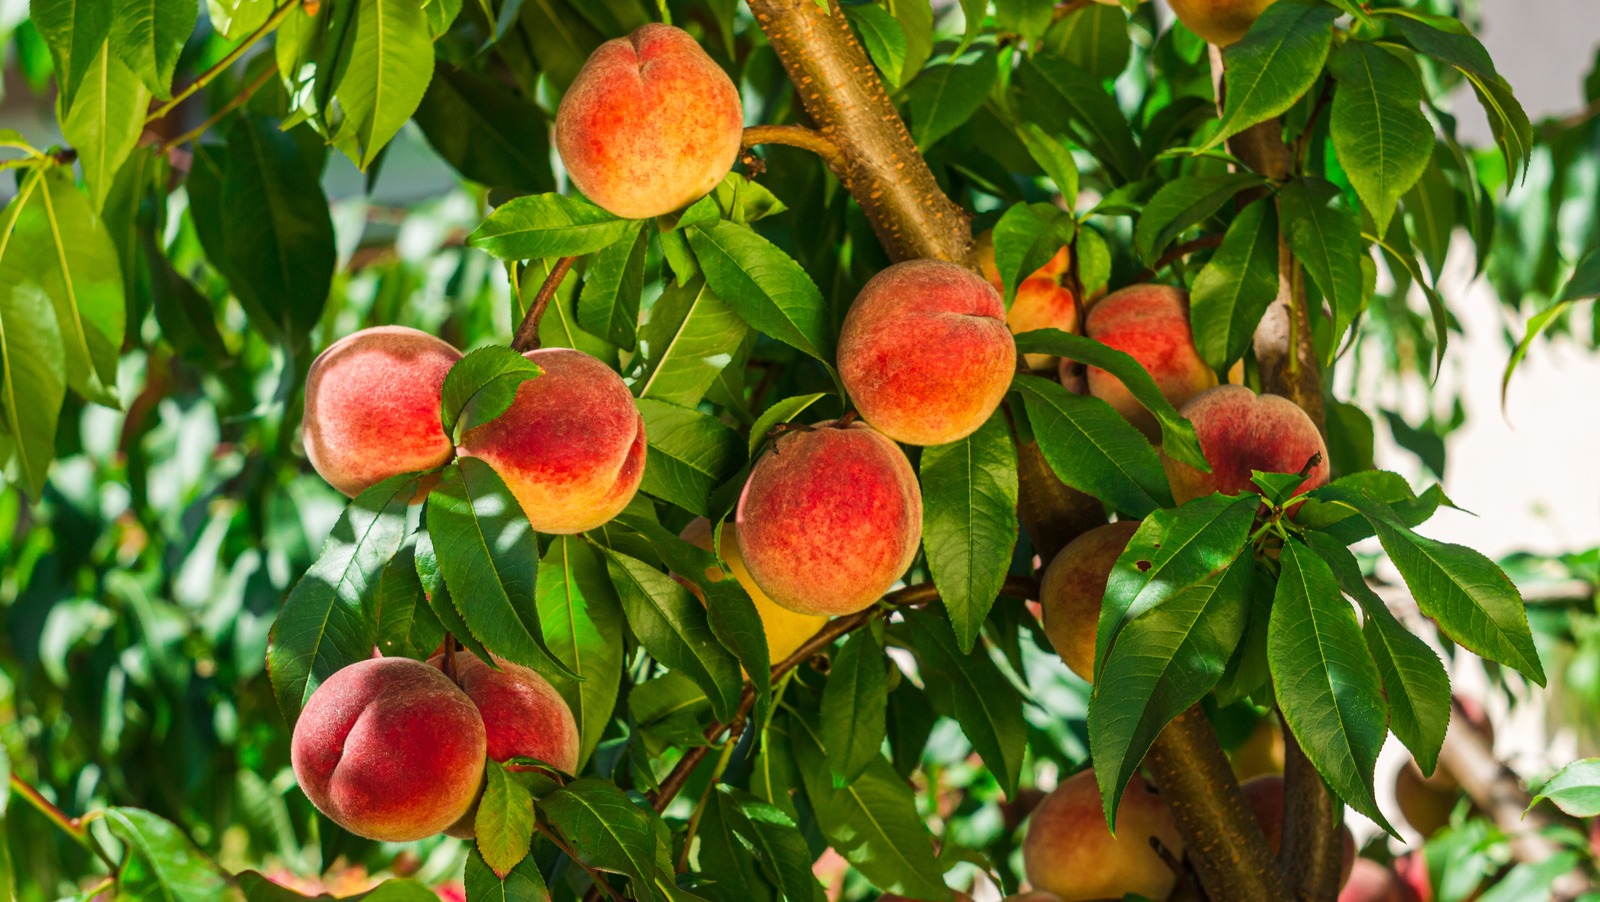 Don't Miss Out on Great Early Season Peaches This Year